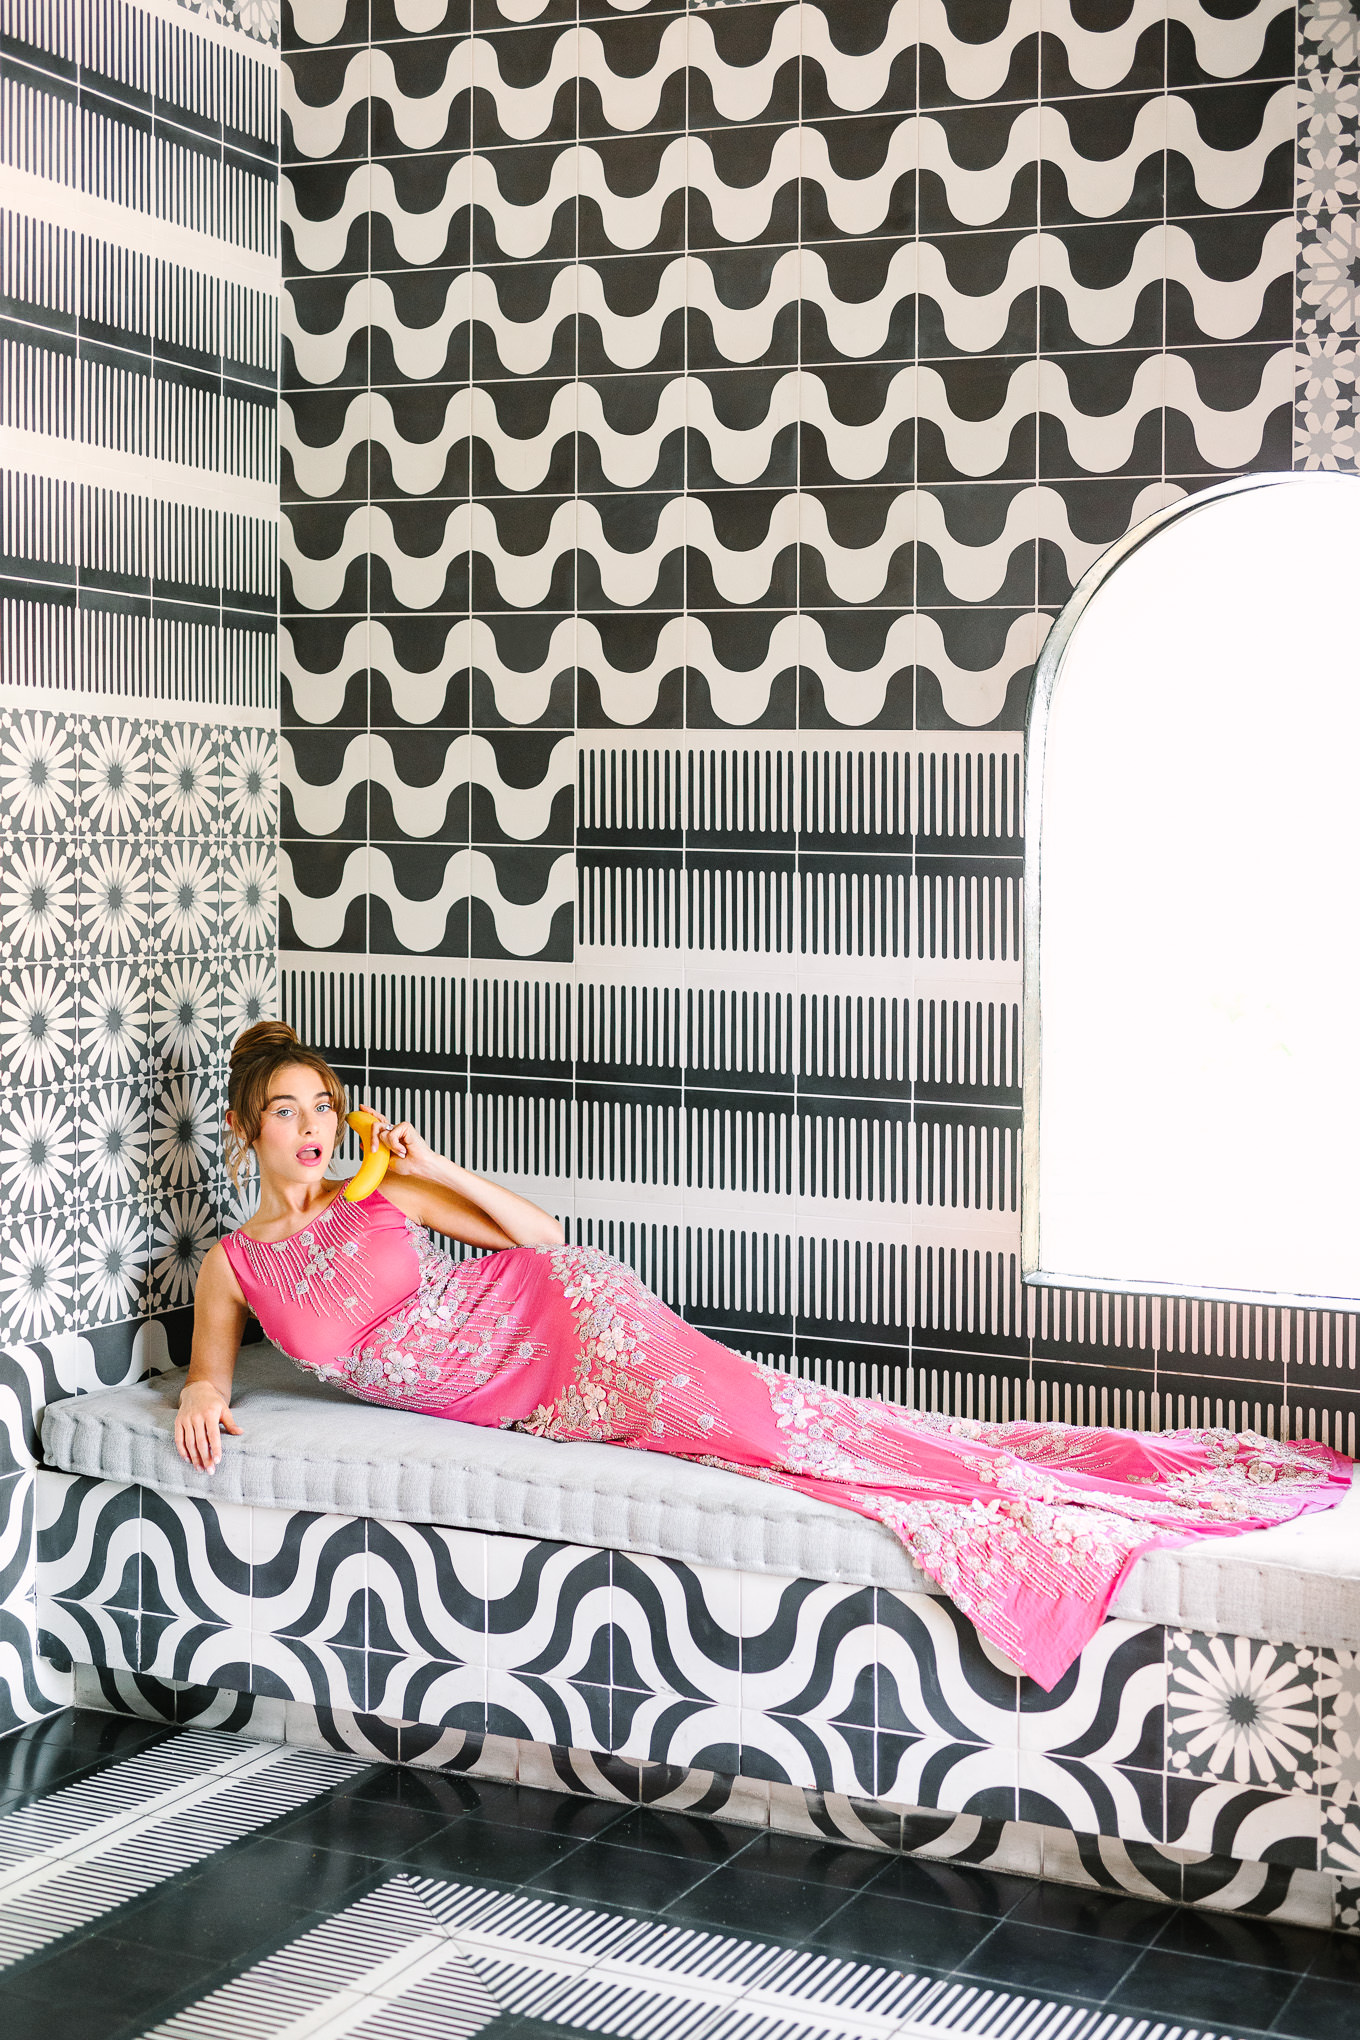 Naeem Khan pink dress banana phone in Sands Hotel tile lobby | Kindred Presets x Mary Costa Photography Sands Hotel Ad Campaign | Colorful Palm Springs wedding photography | #palmspringsphotographer #lightroompresets #sandshotel #pinkhotel   Source: Mary Costa Photography | Los Angeles